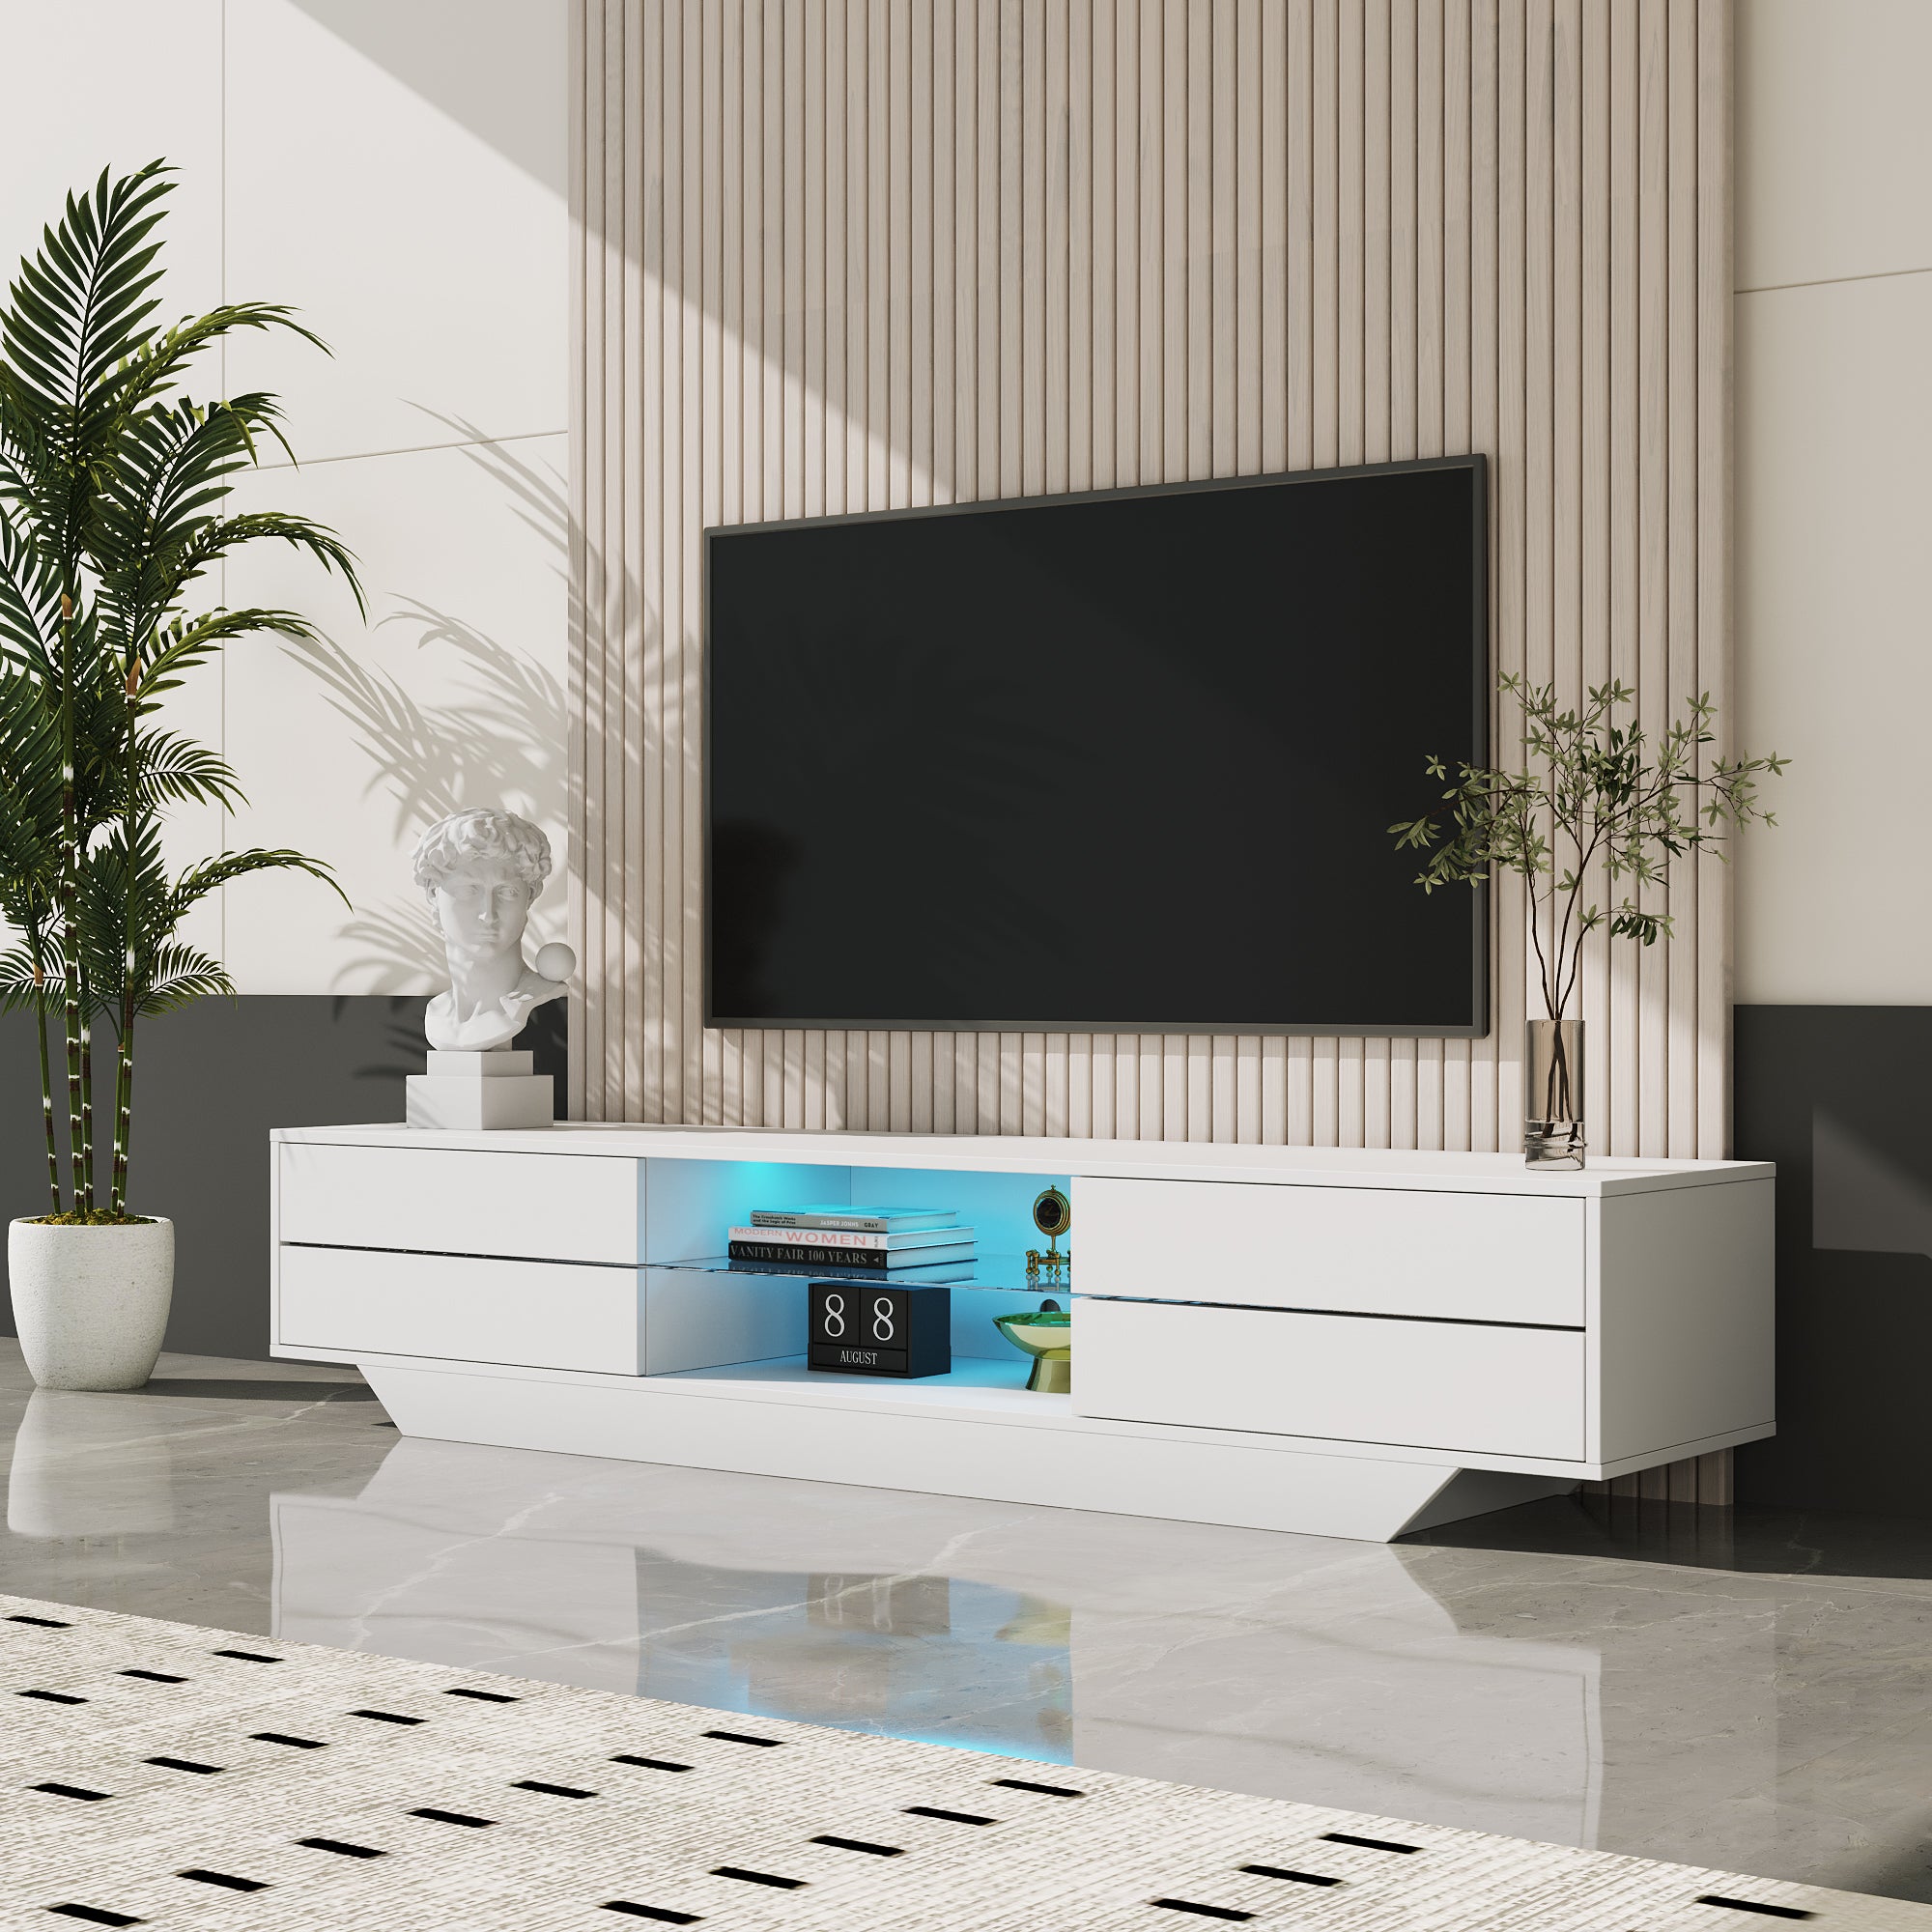 Harmony Haven High Gloss TV Stand In White Featured With Multi LED Lighting